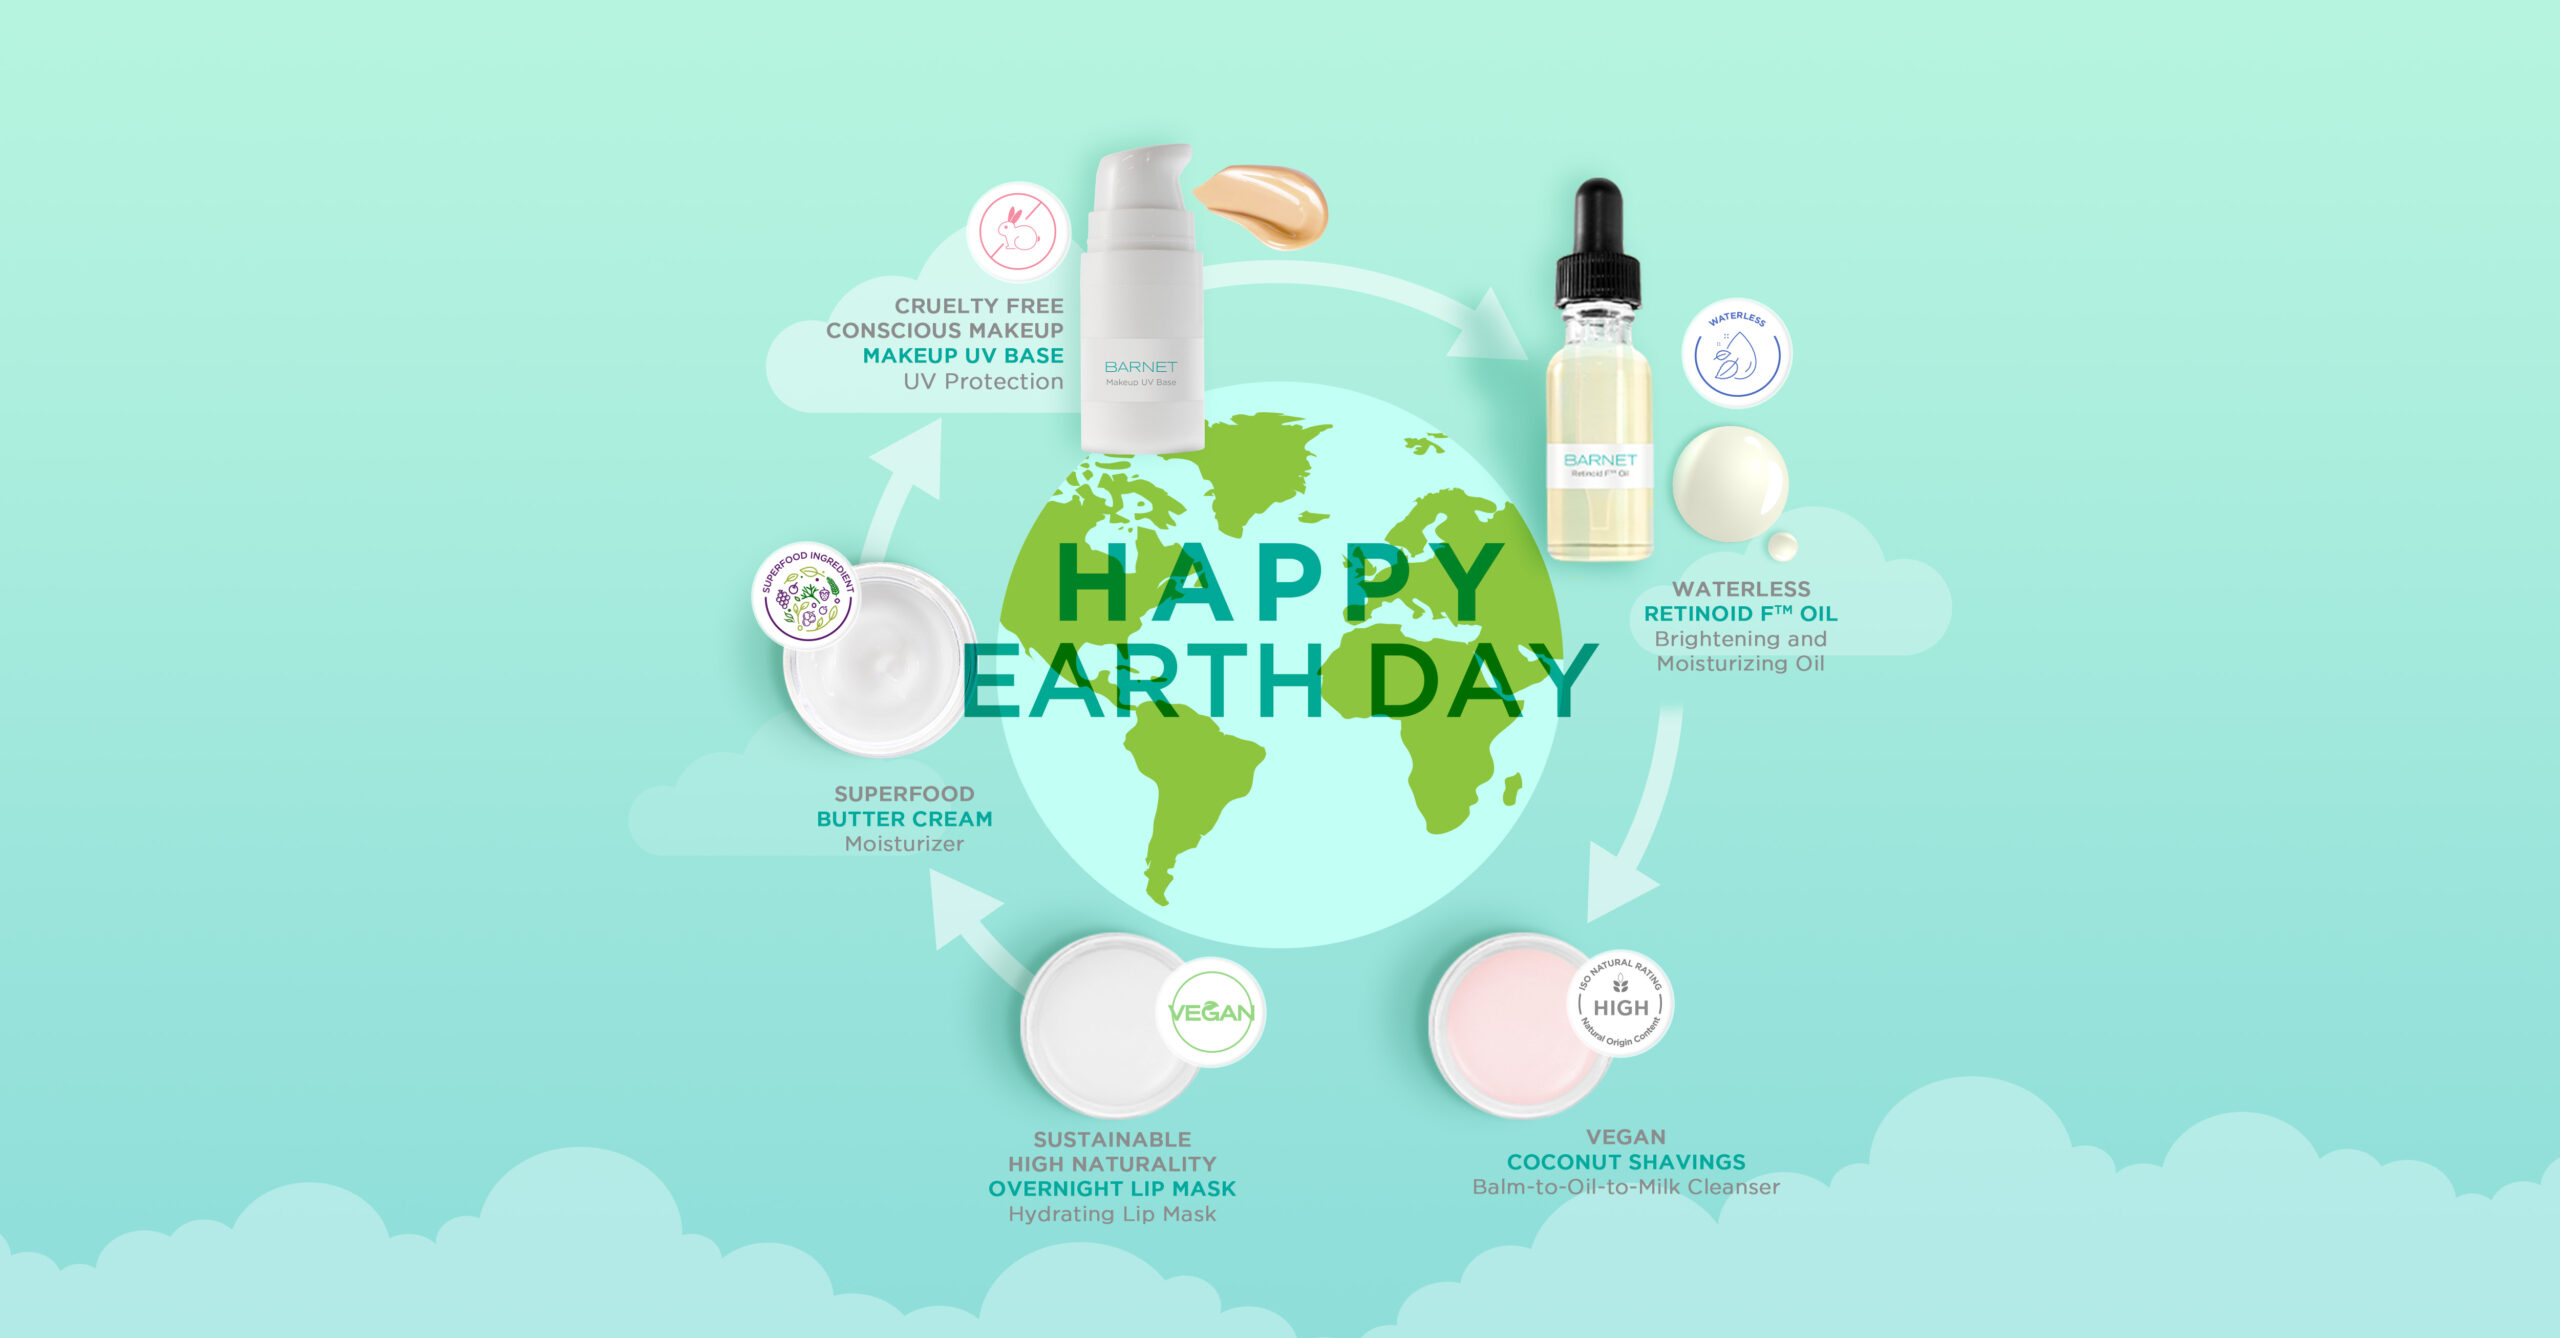 Celebrating Earth Day: A Conscious Beauty Approach